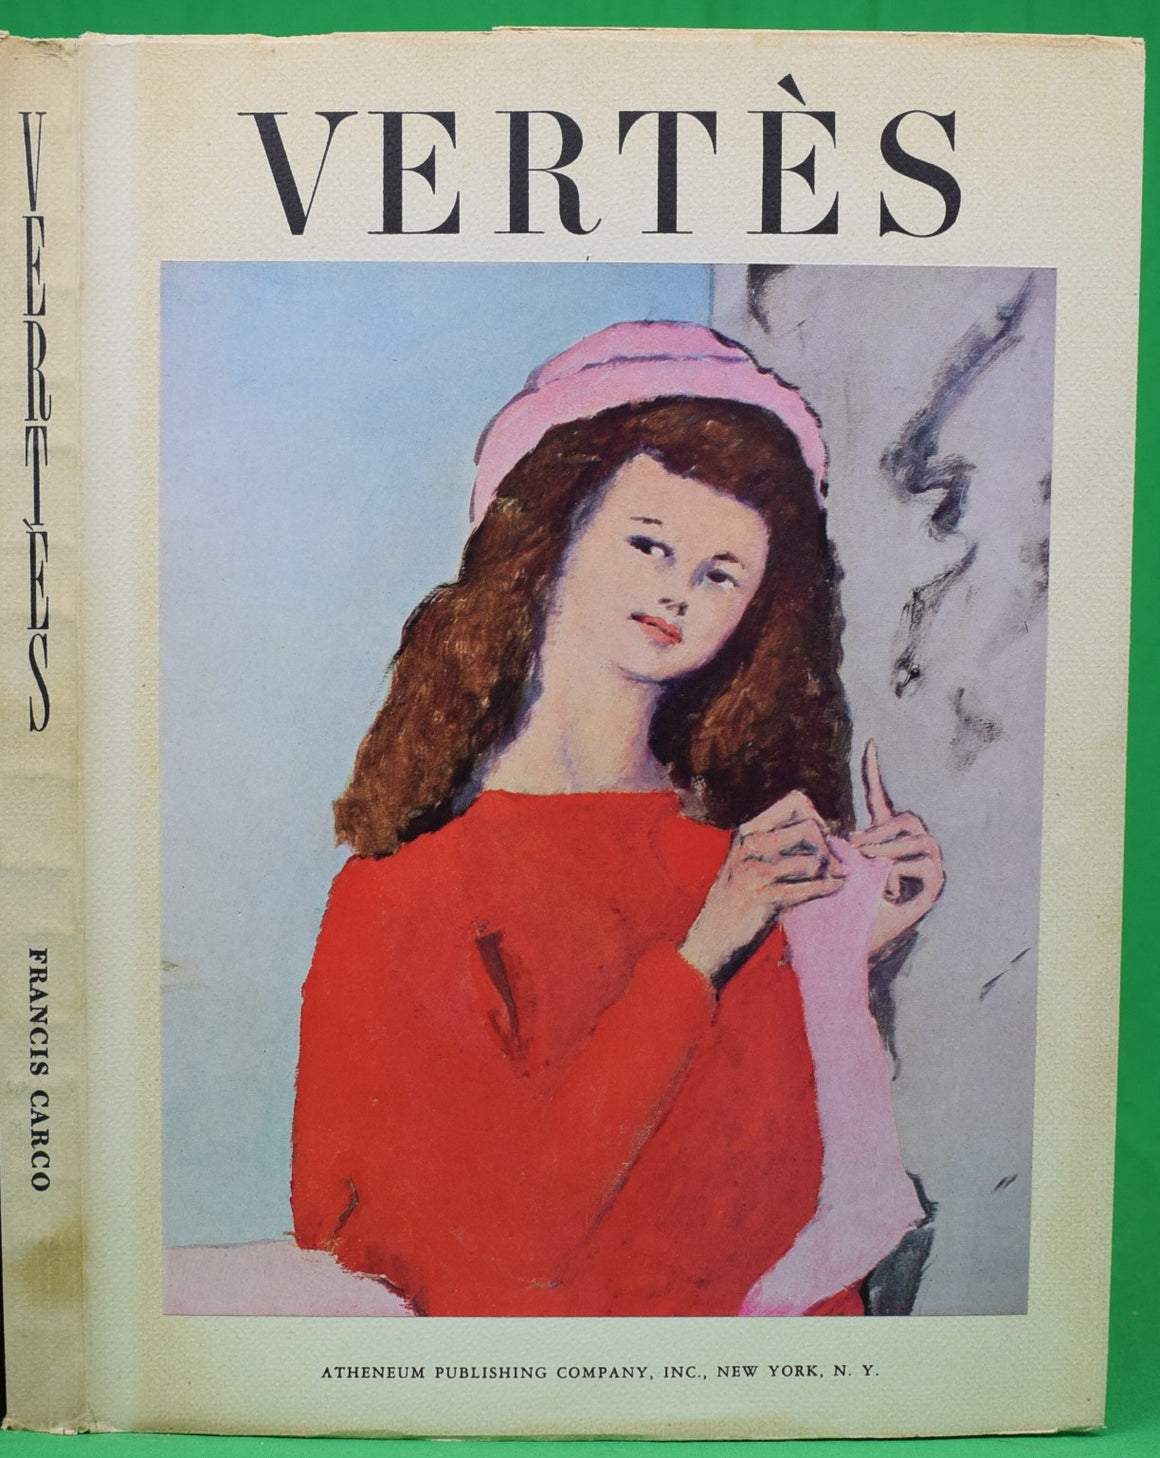 "Vertes" 1946 CARCO, Francis [text by]